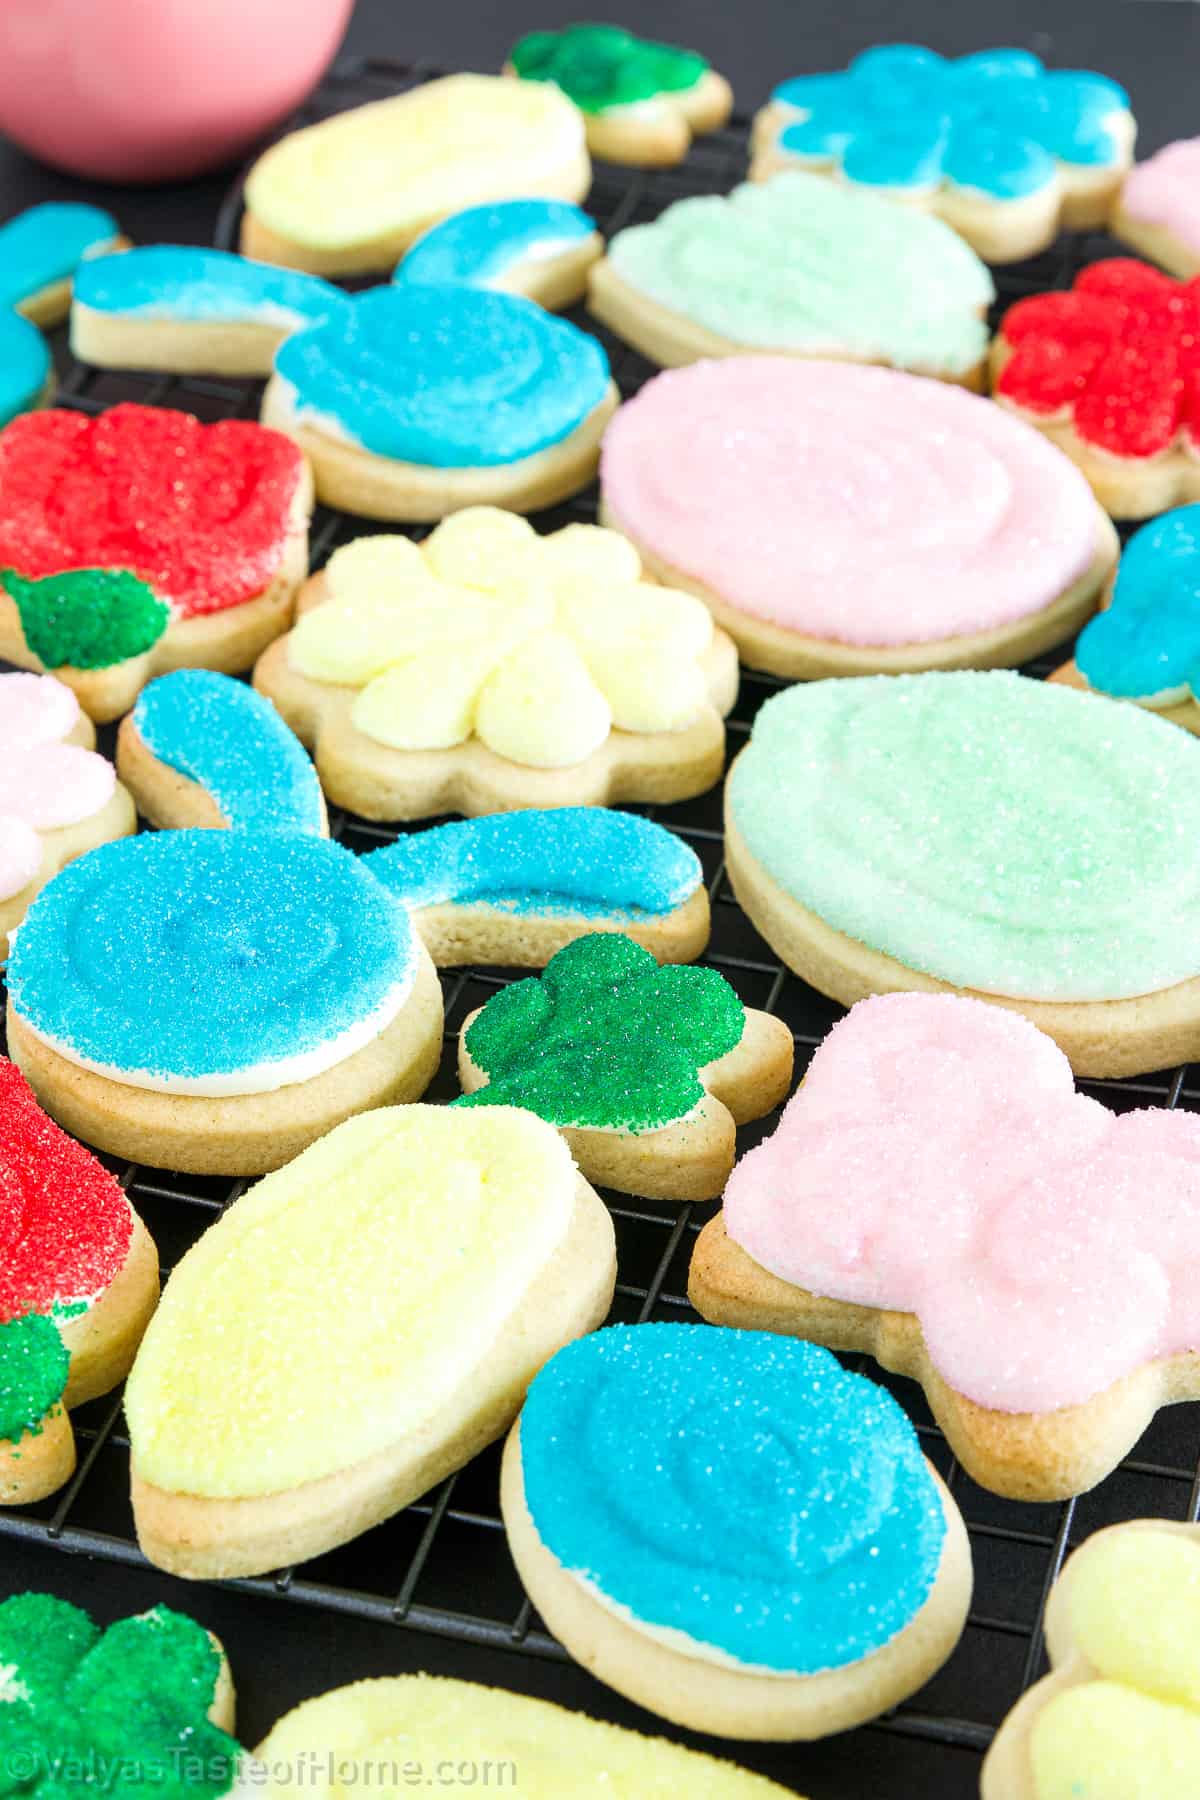 There's nothing quite like the sweet satisfaction of biting into a perfectly baked, soft, frosted sugar cookie. 